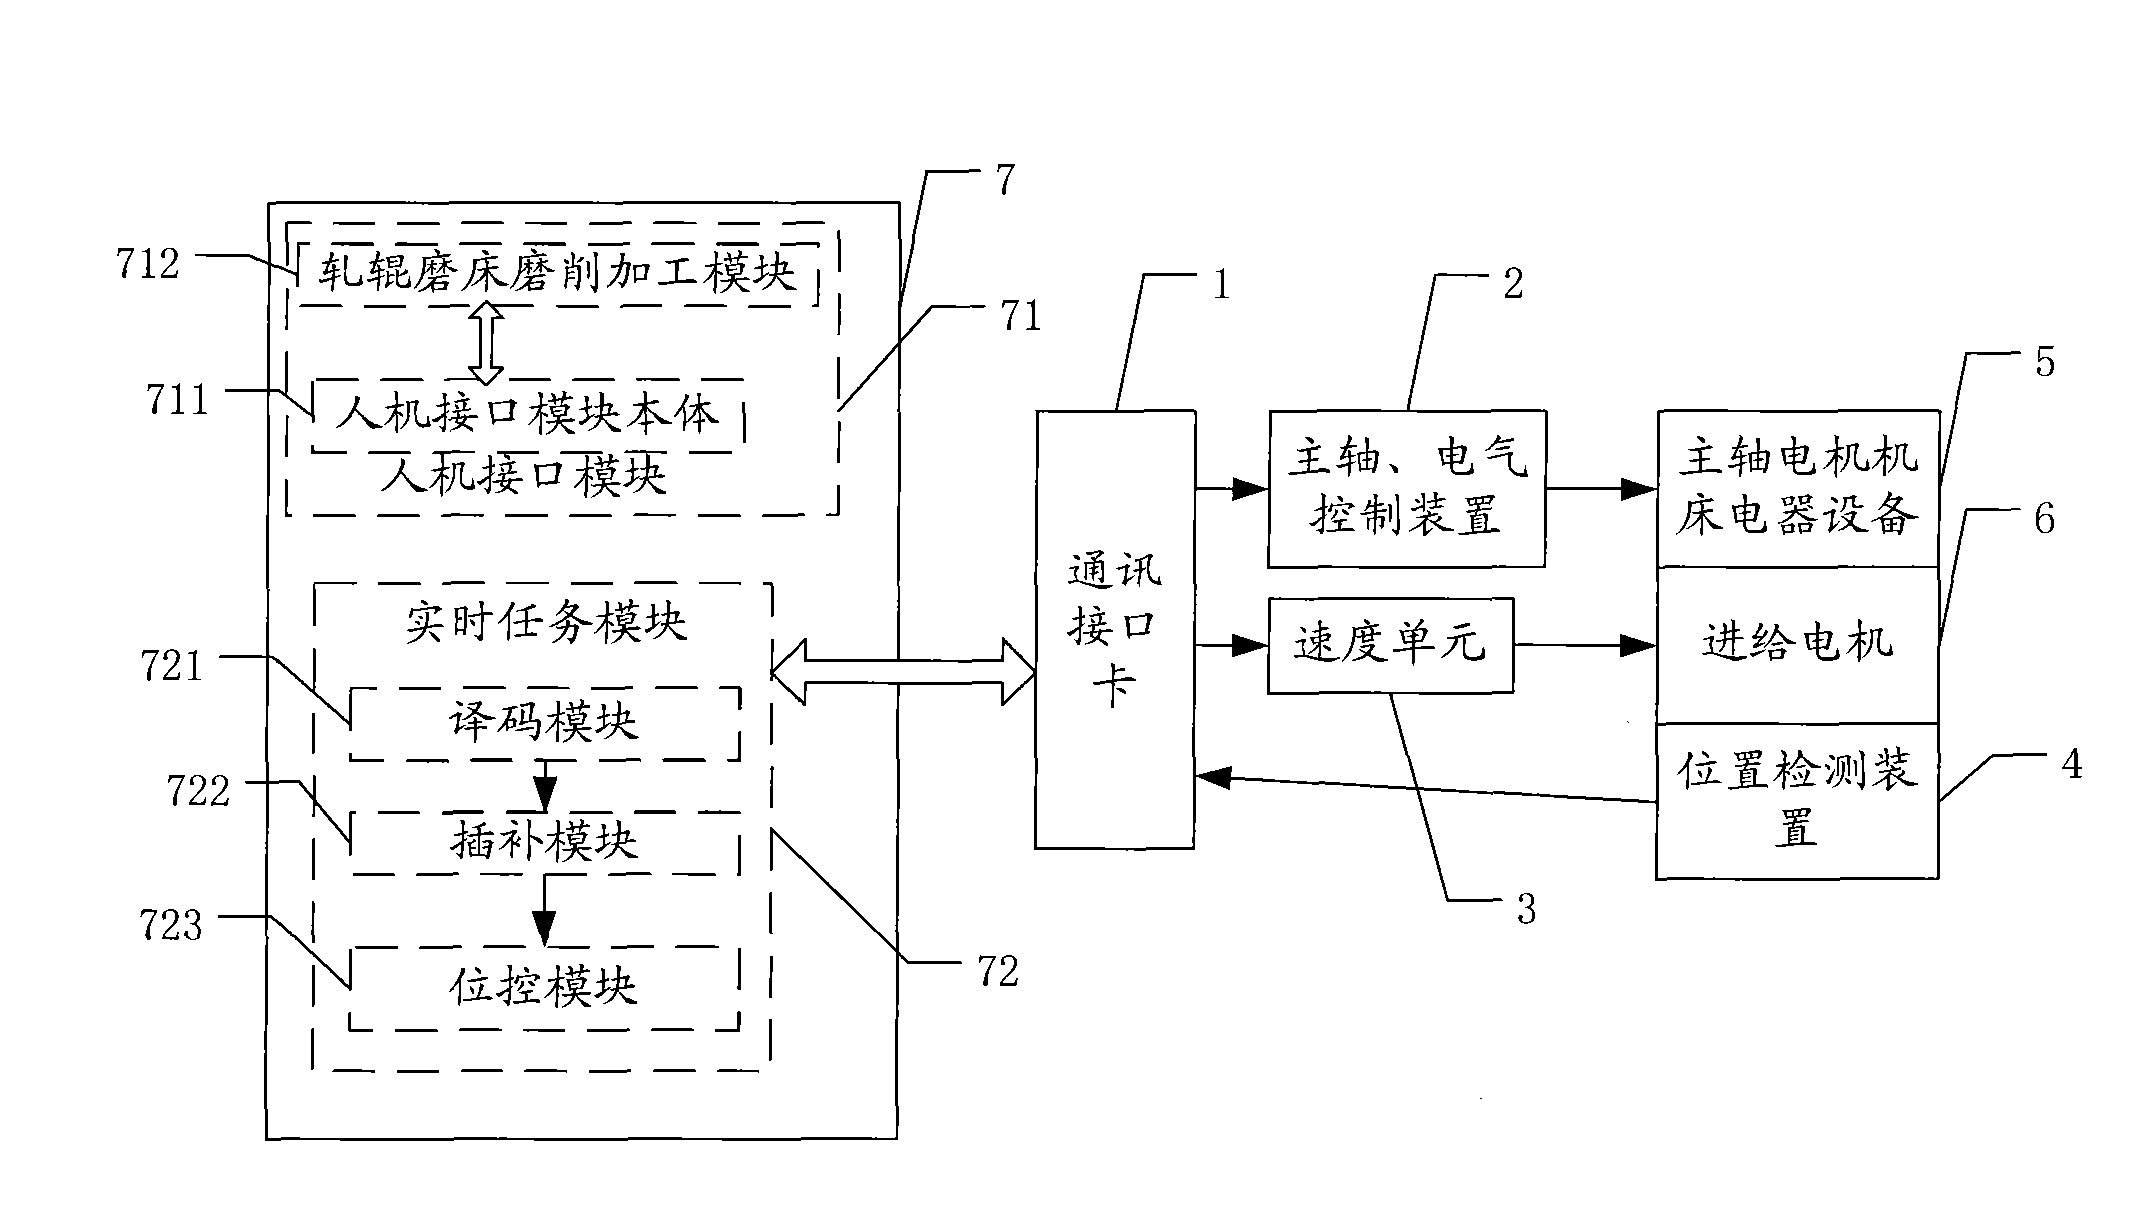 Numerical control system for roll grinder and control method thereof